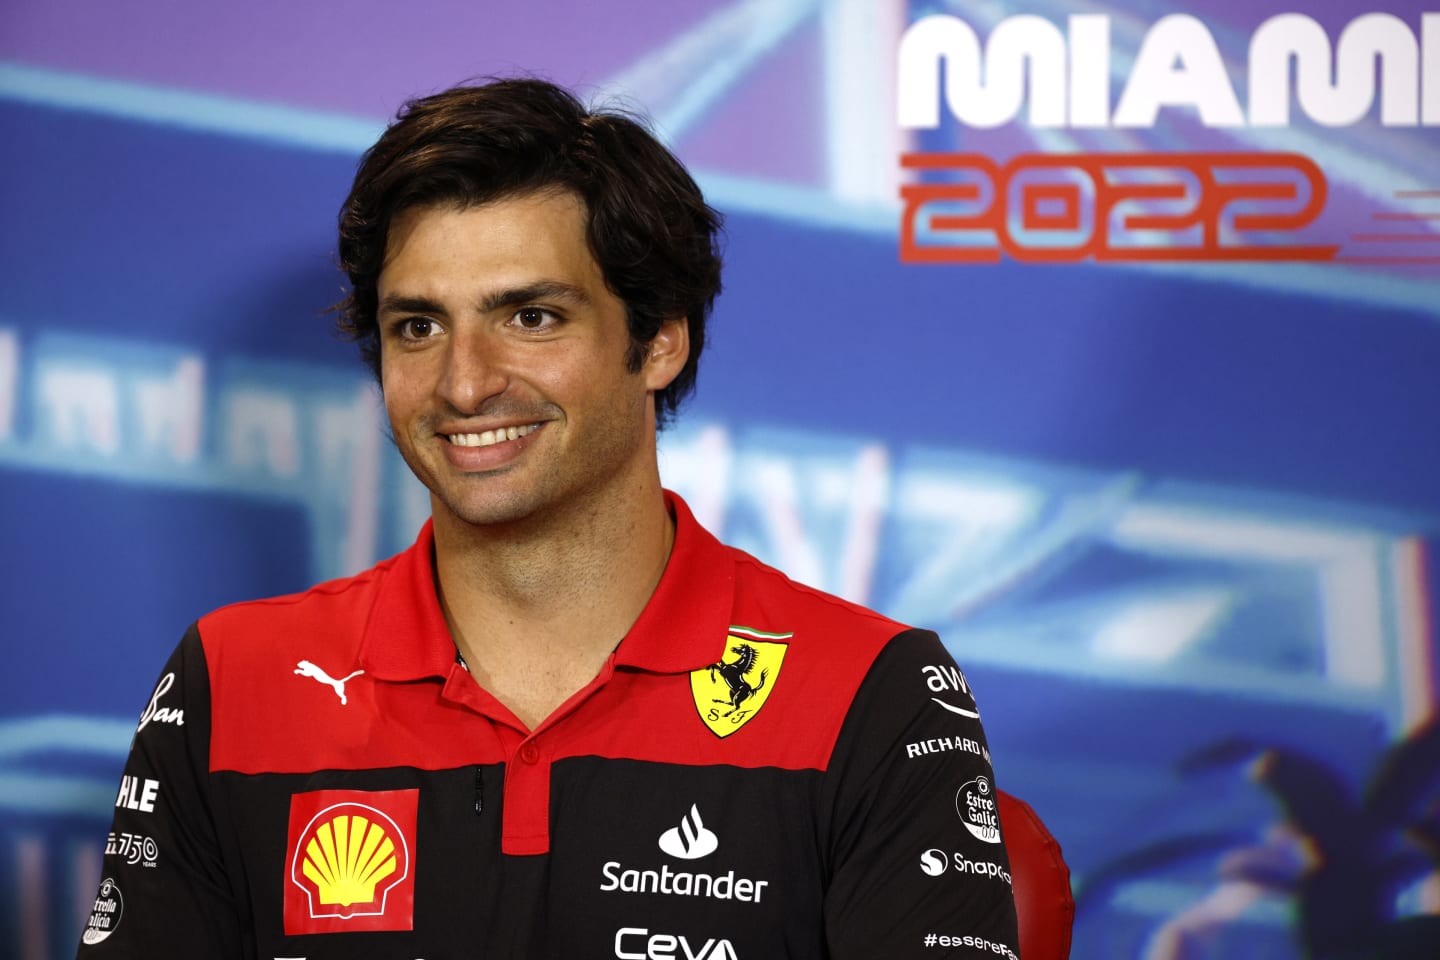 MIAMI, FLORIDA - MAY 06: Carlos Sainz of Spain and Ferrari talks in the Drivers Press Conference prior to practice ahead of the F1 Grand Prix of Miami at the Miami International Autodrome on May 06, 2022 in Miami, Florida. (Photo by Jared C. Tilton/Getty Images)